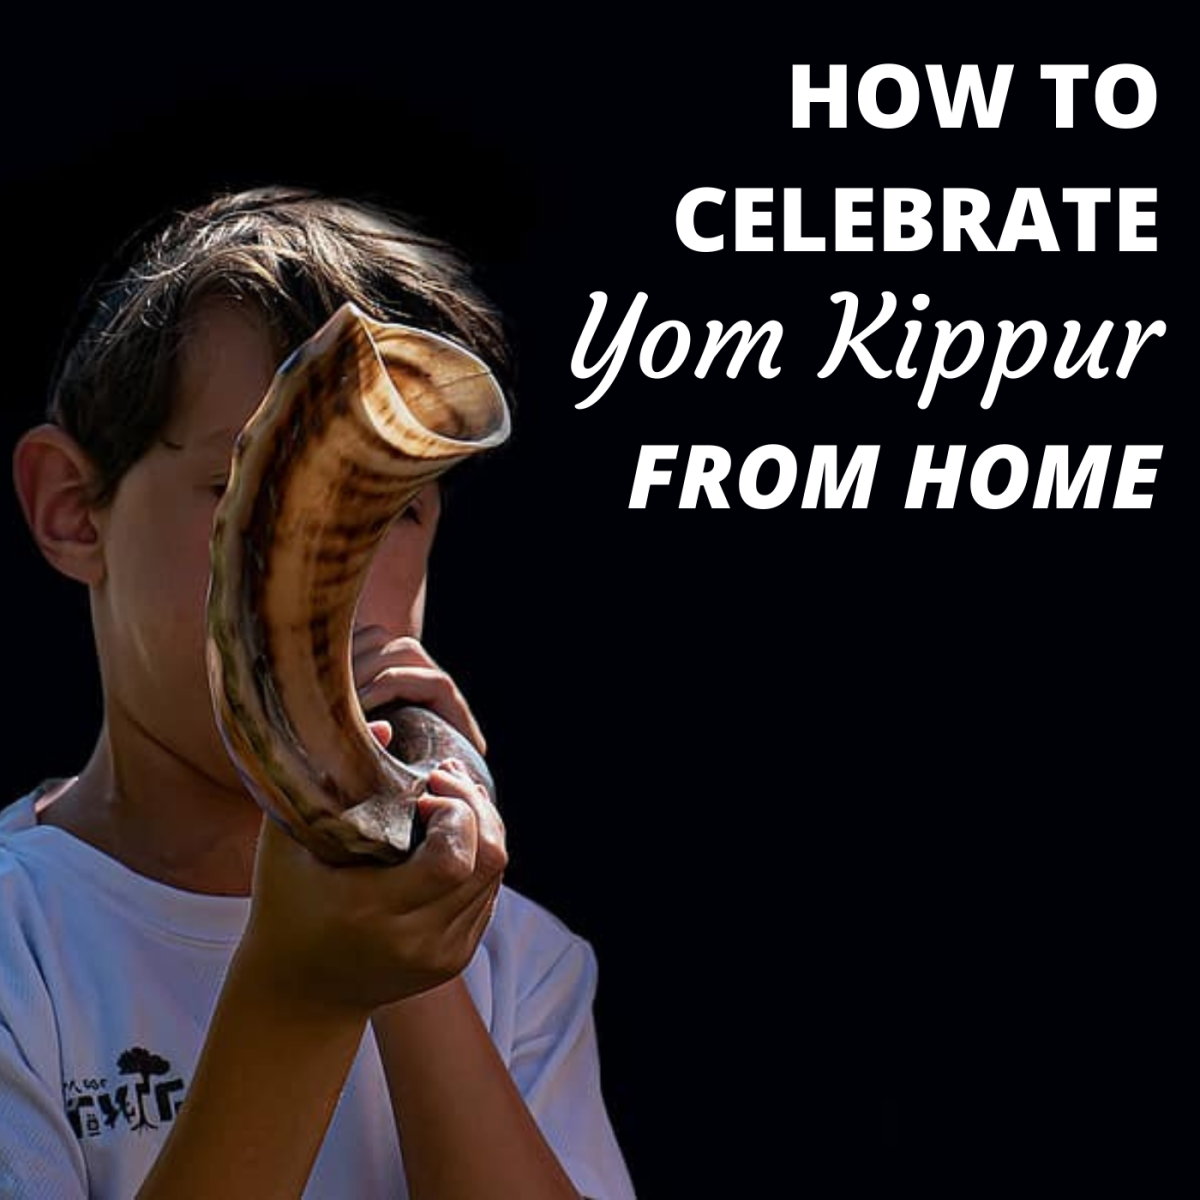 4 Ways to Celebrate Yom Kippur Without Going to Temple